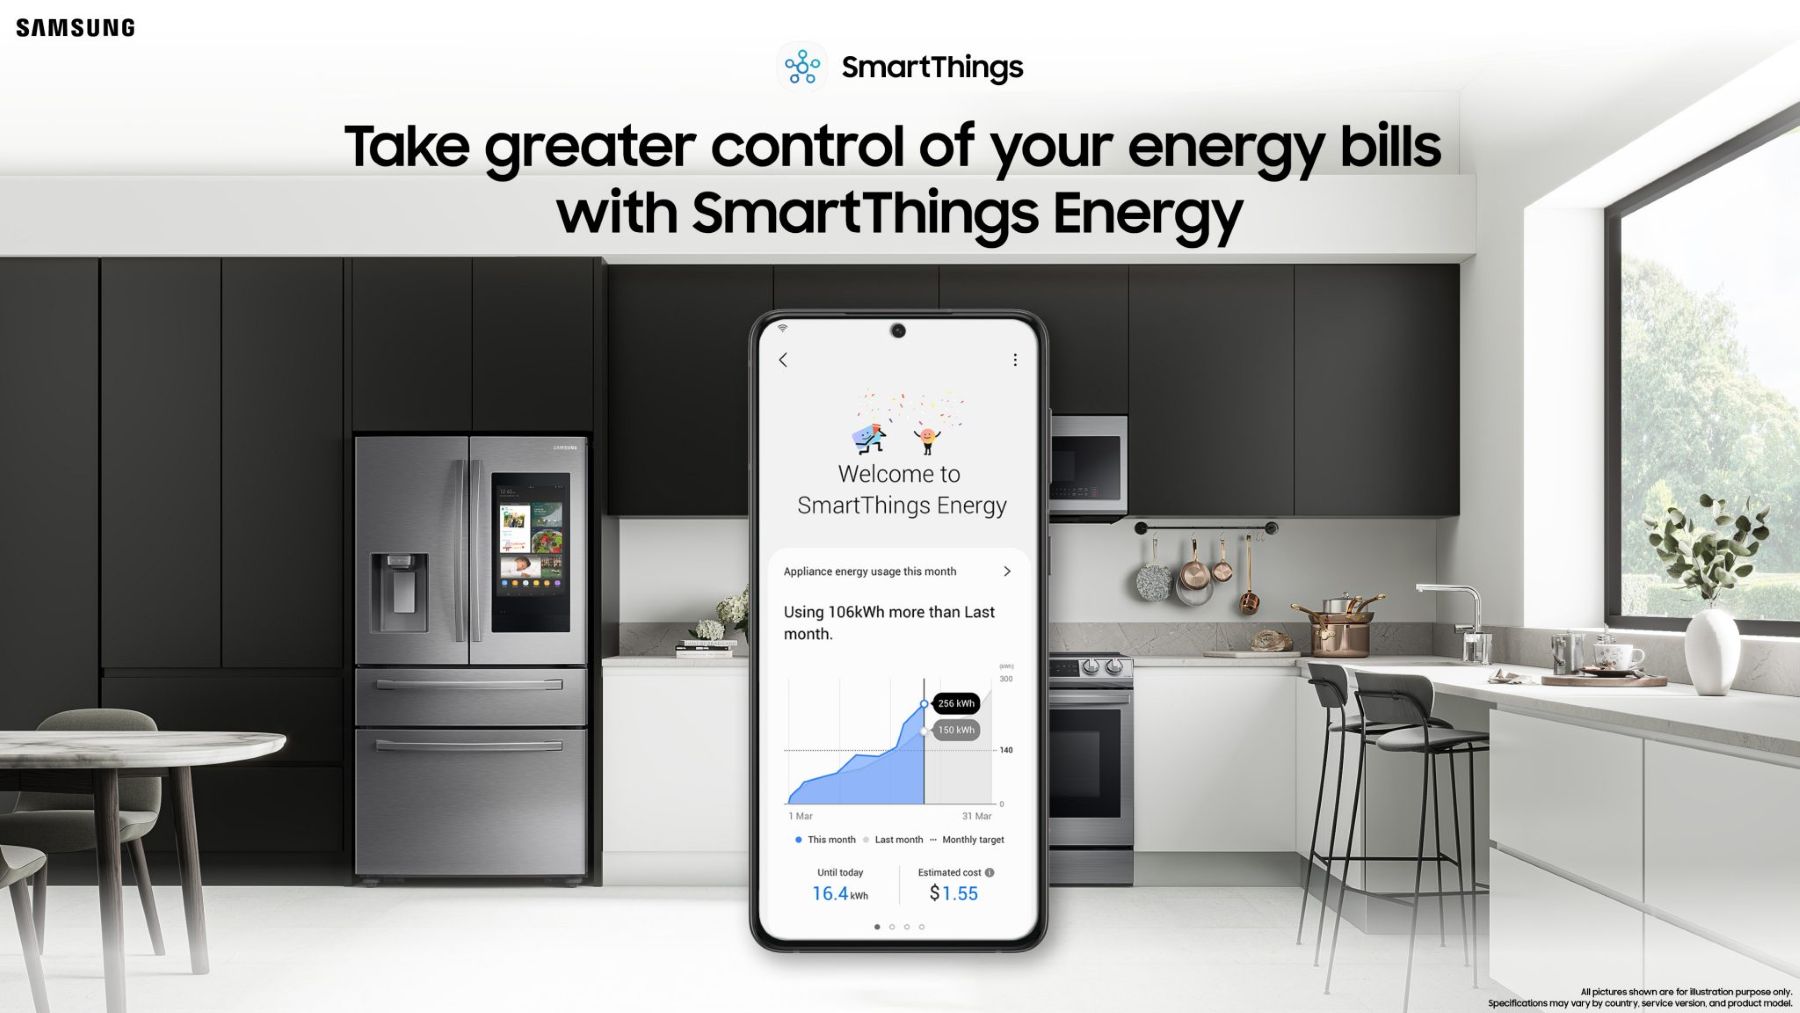 Samsung Introduces New Energy Efficient Appliances, Including America’s Largest Capacity Refrigerator1 and a Laundry Pair Designed for Pet Owners  